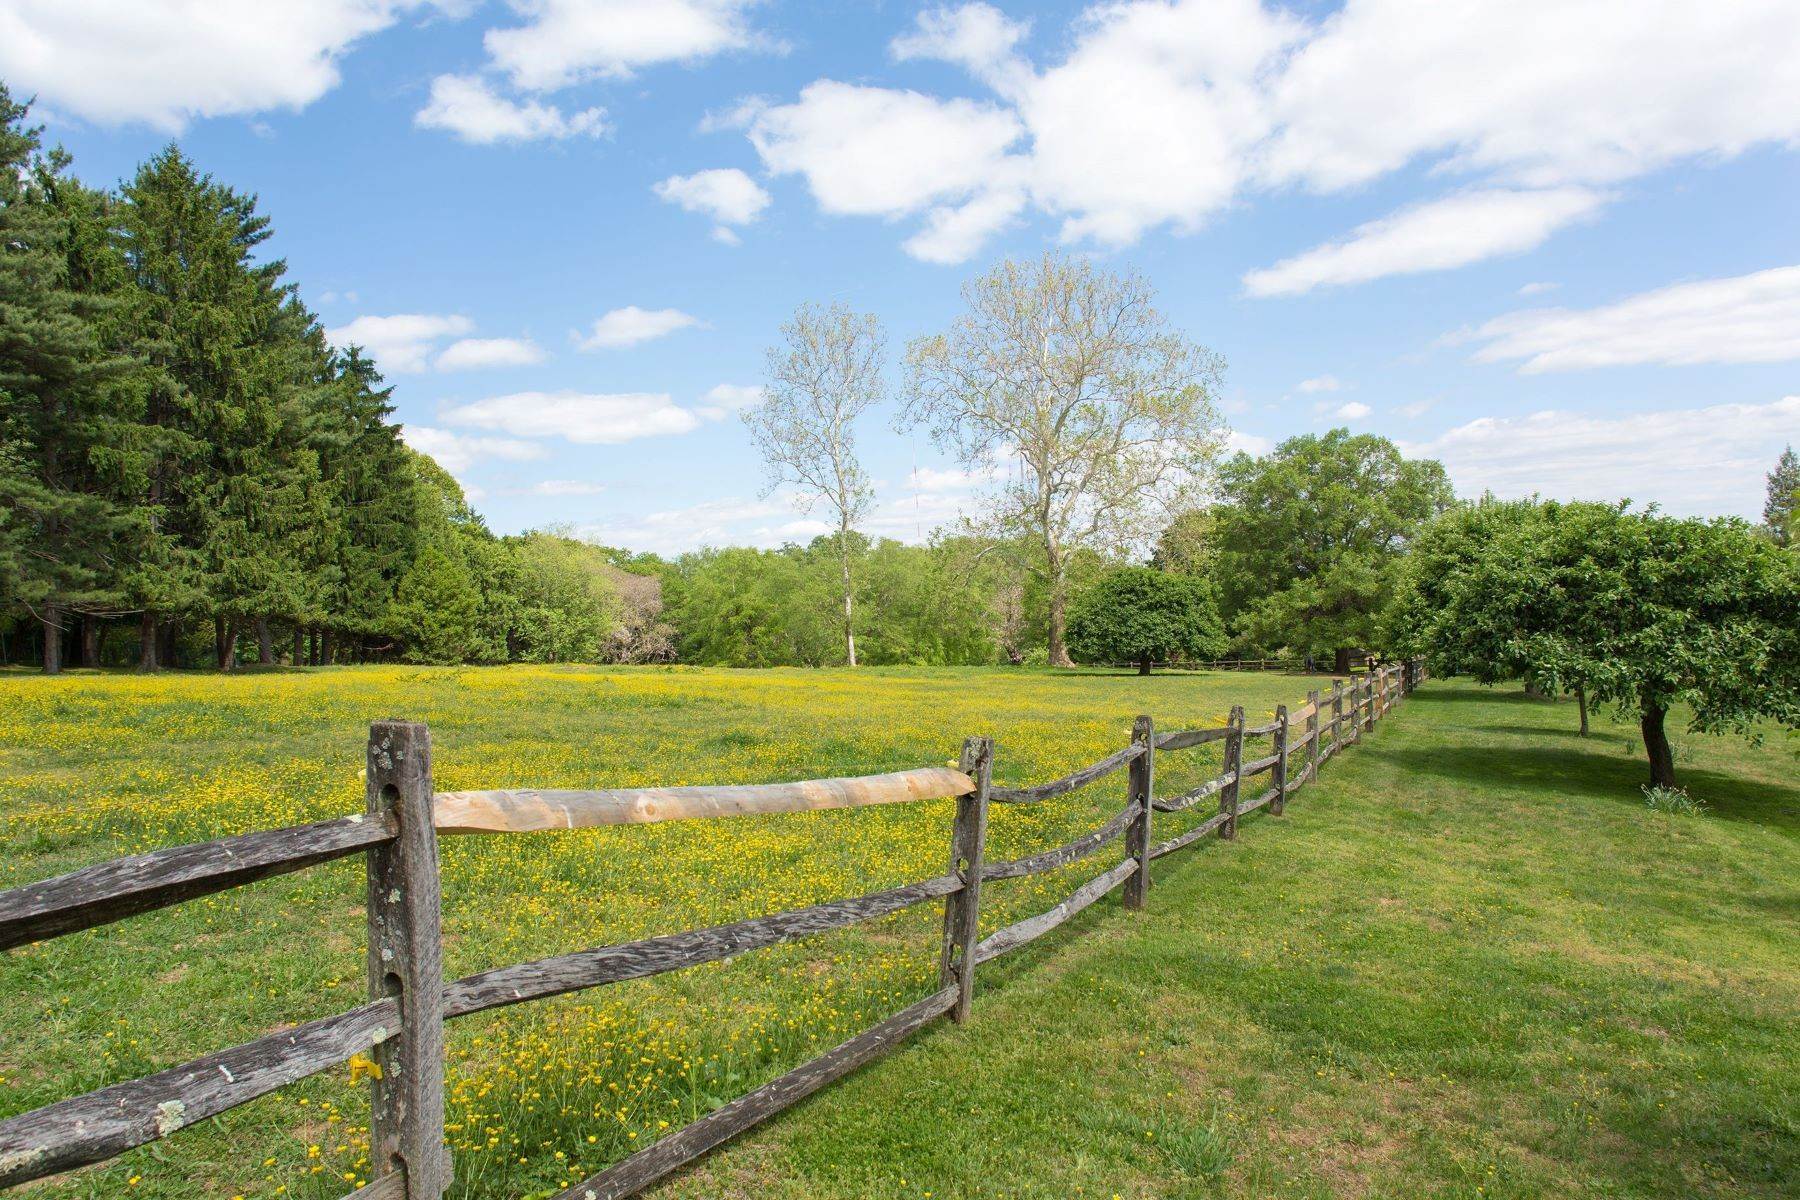 36. Land for Sale at 1543 Monk Road #1 and #2 (Homesites), Gladwyne, PA 19035 1543 Monk Road, #1 and #2 (Homesites) Gladwyne, Pennsylvania 19035 United States